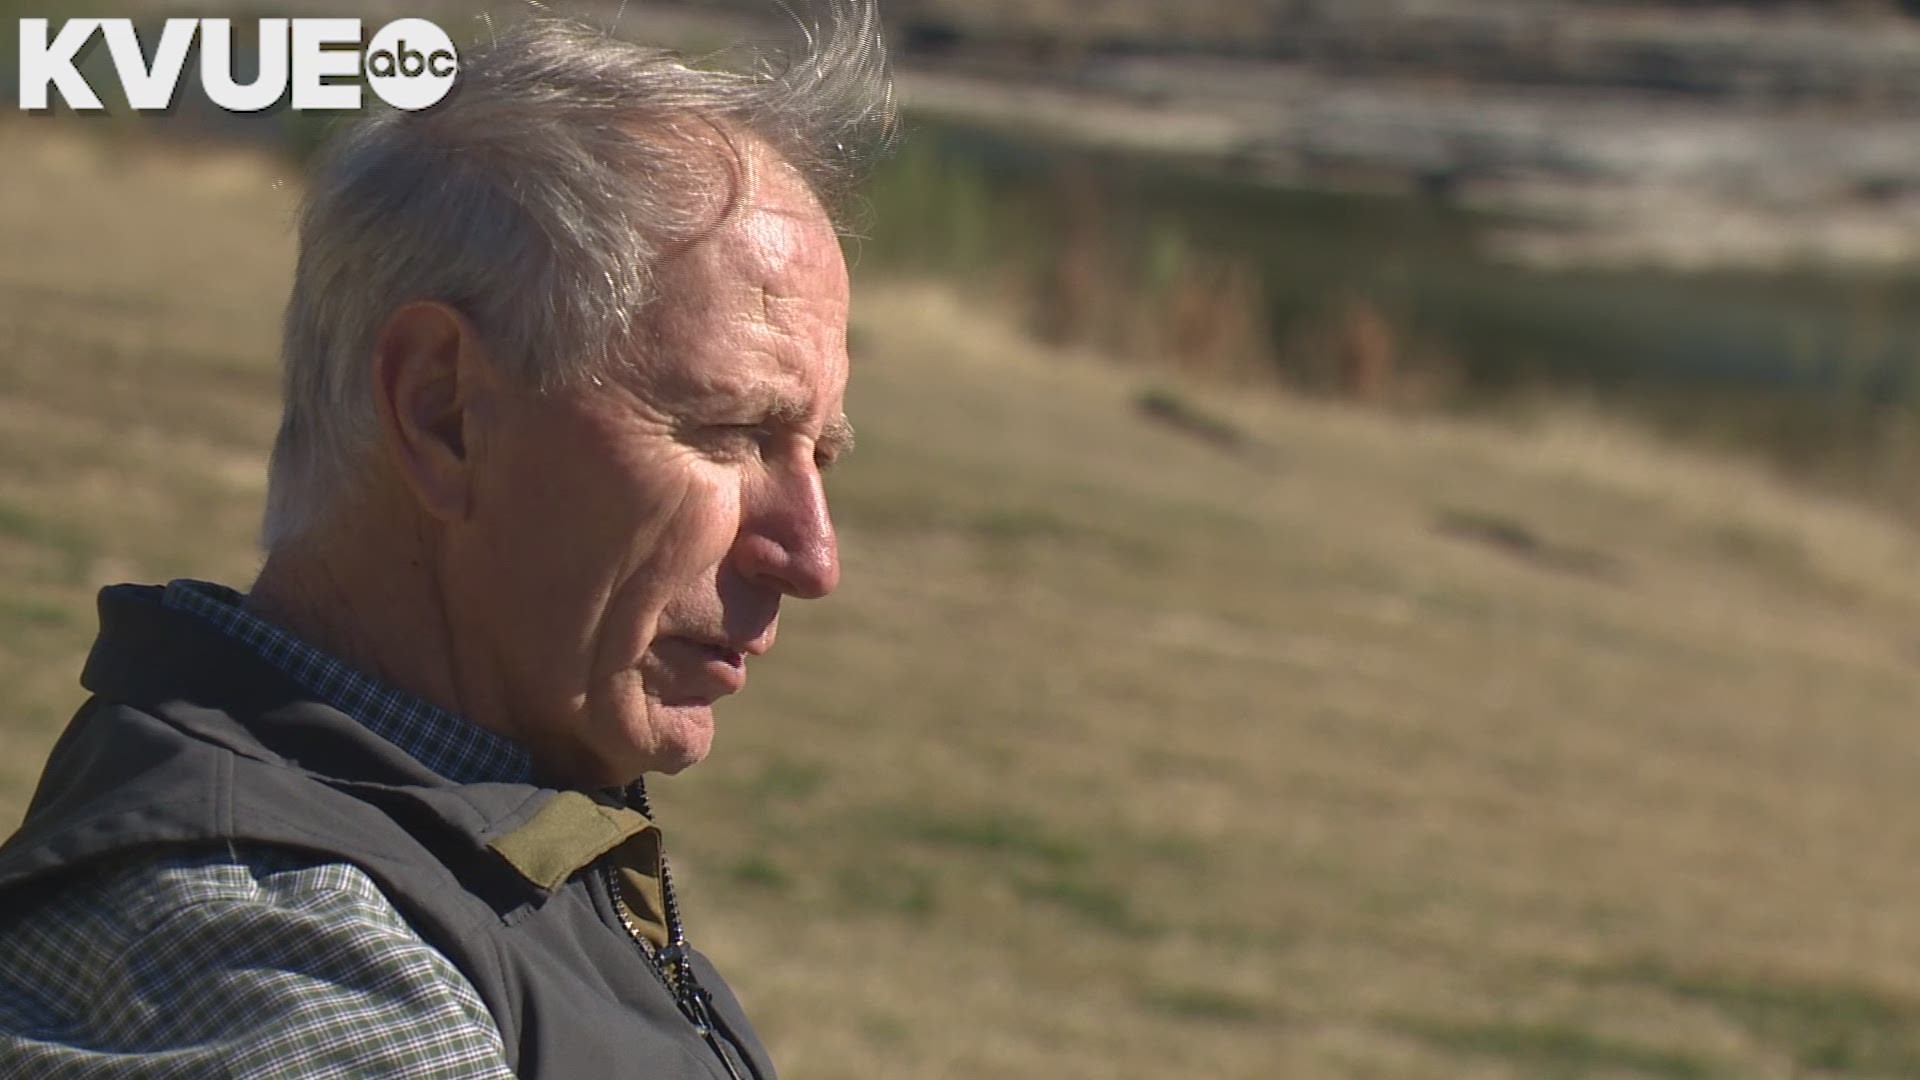 J.T. Morgan lives along the Blanco River and said the treated wastewater in the river is like a "dirty little secret."